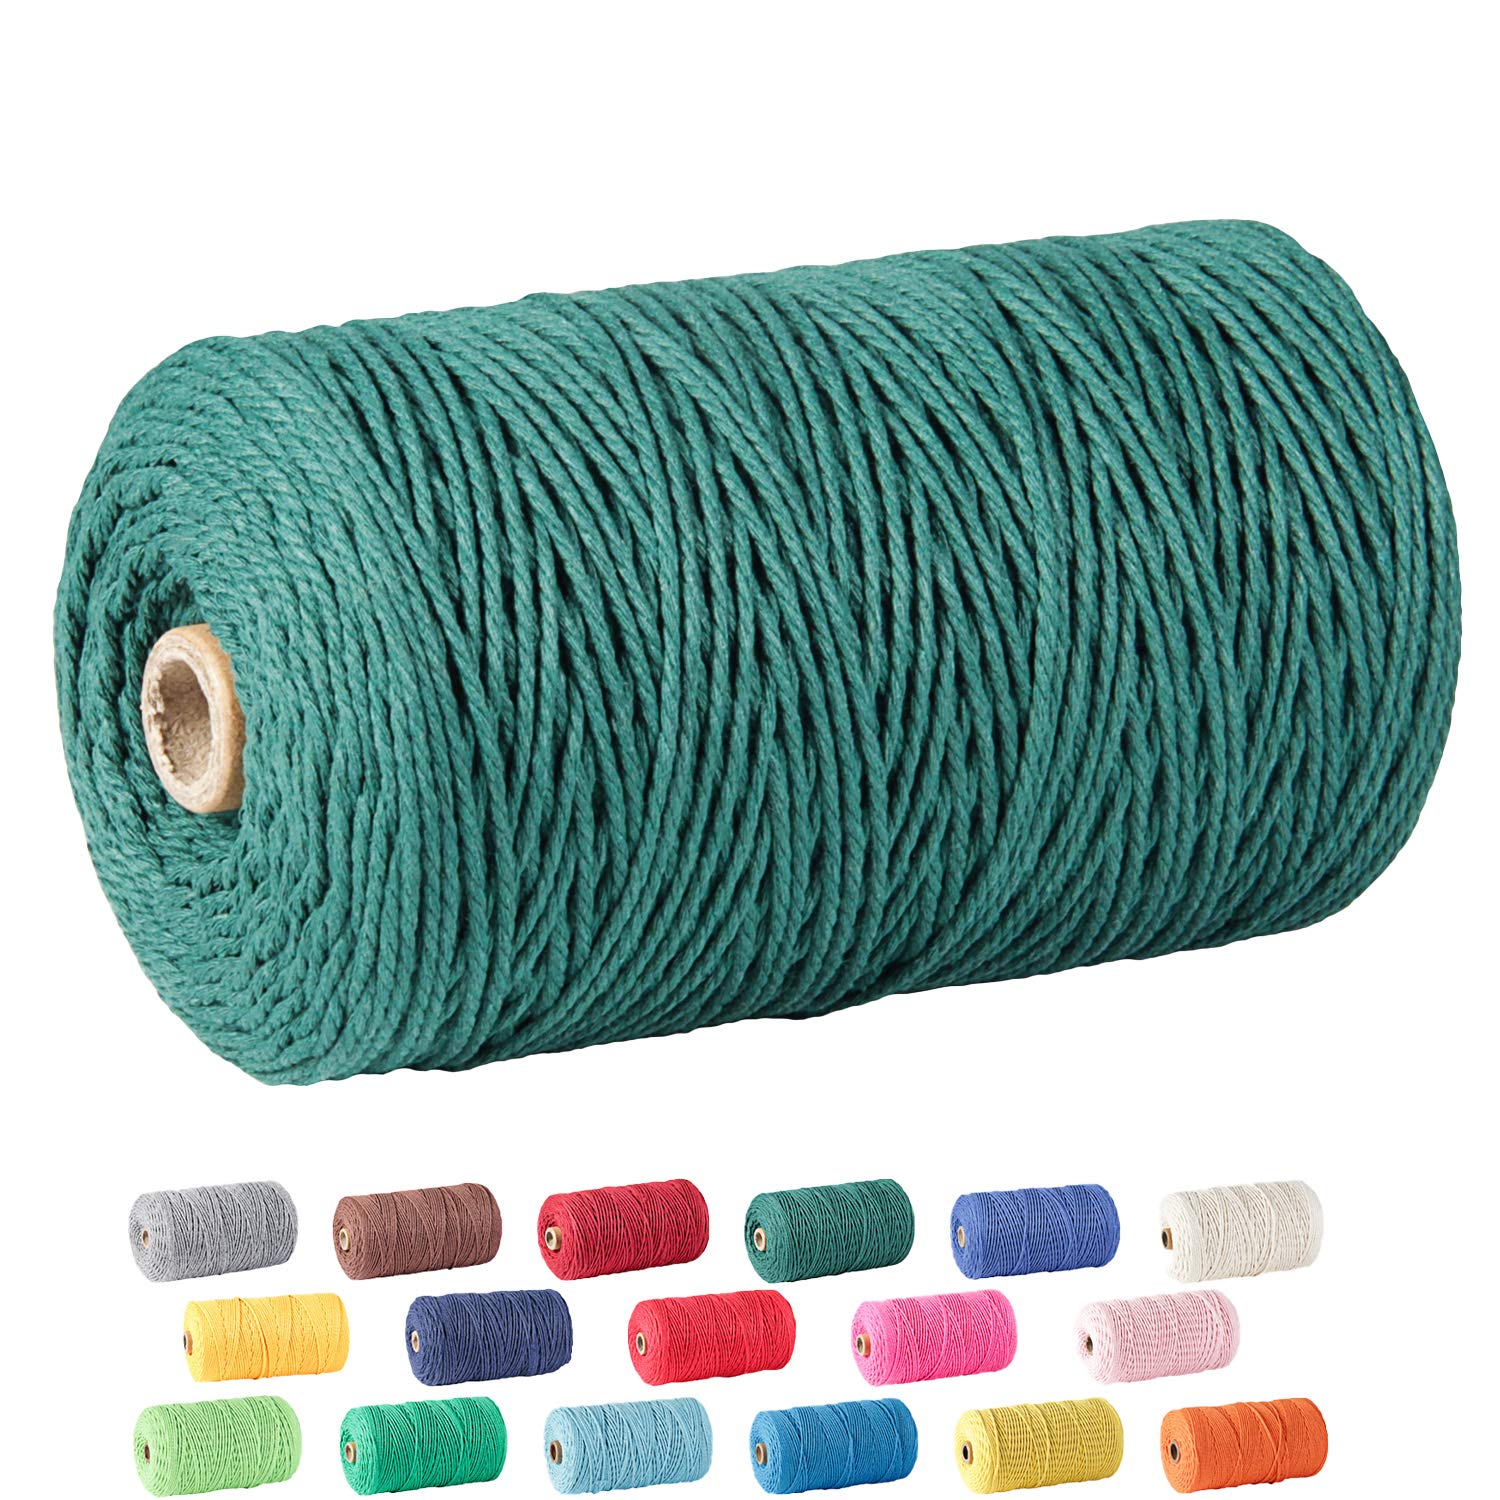 Macrame Cord ZOUTOG 2mm x 328 yd (About 300m) 100% Natural Cotton